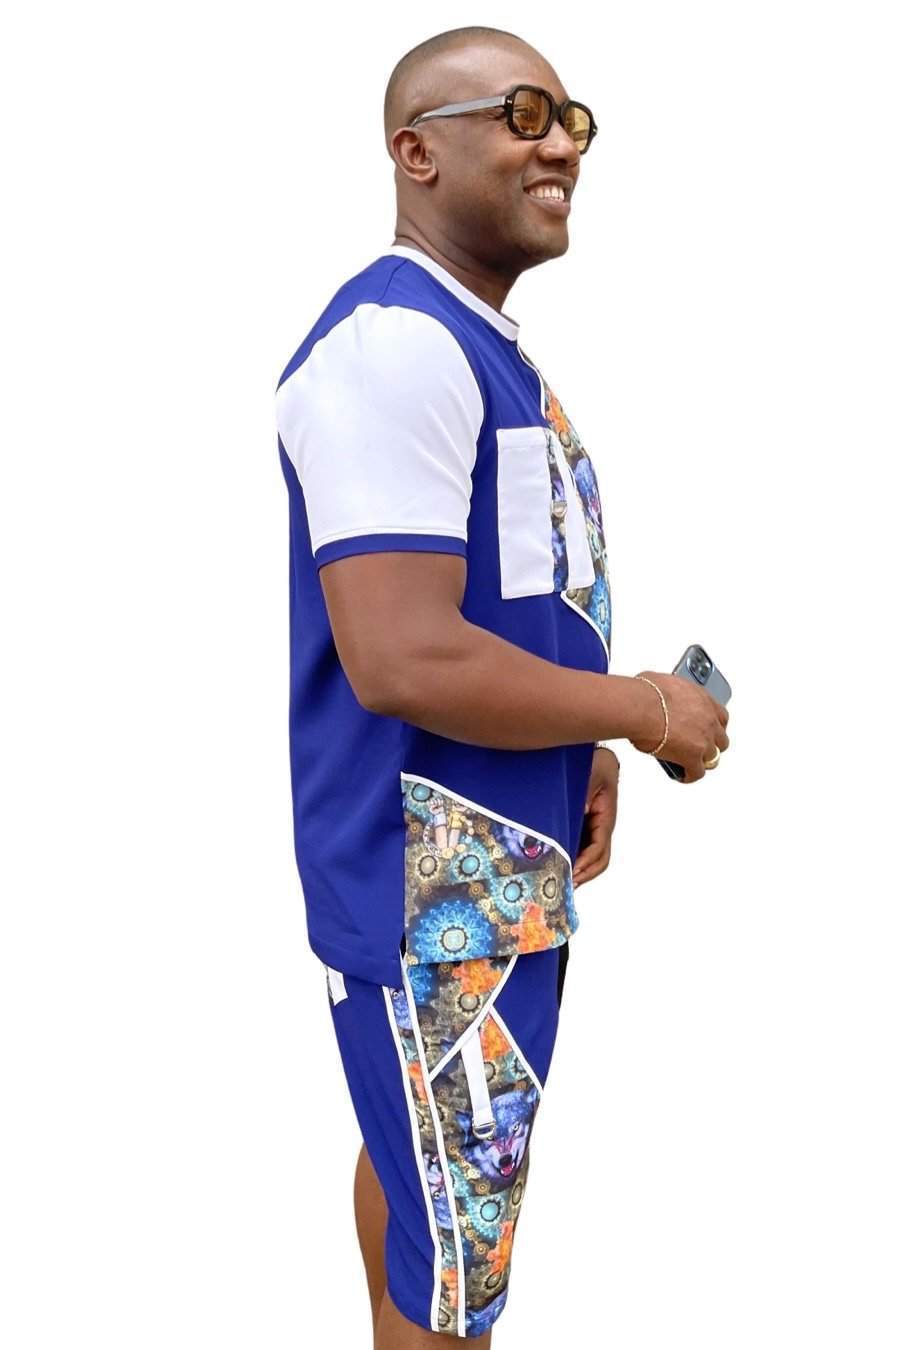 African Native Nigerian Ankara Blue-danddclothing-African Wear for Men,FEATURED,Traditionals